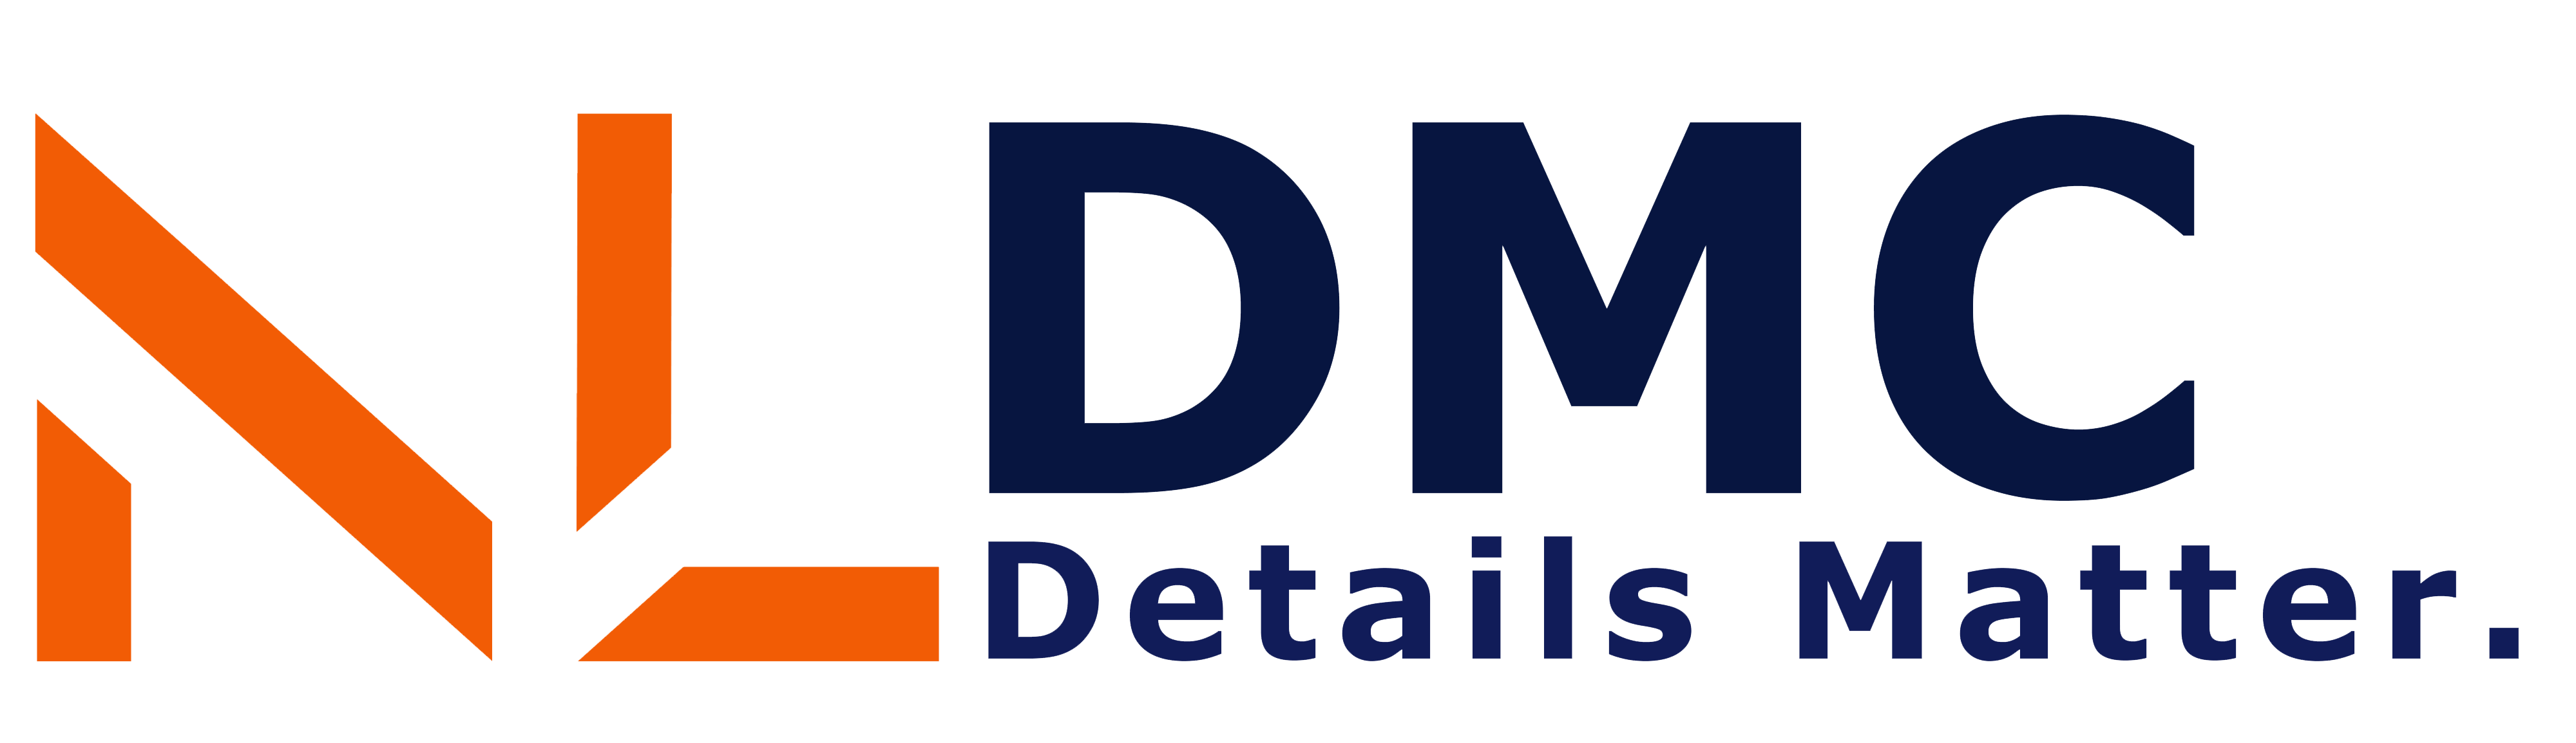 DMC services in Amsterdam and the Netherlands | Next Level DMC Logo